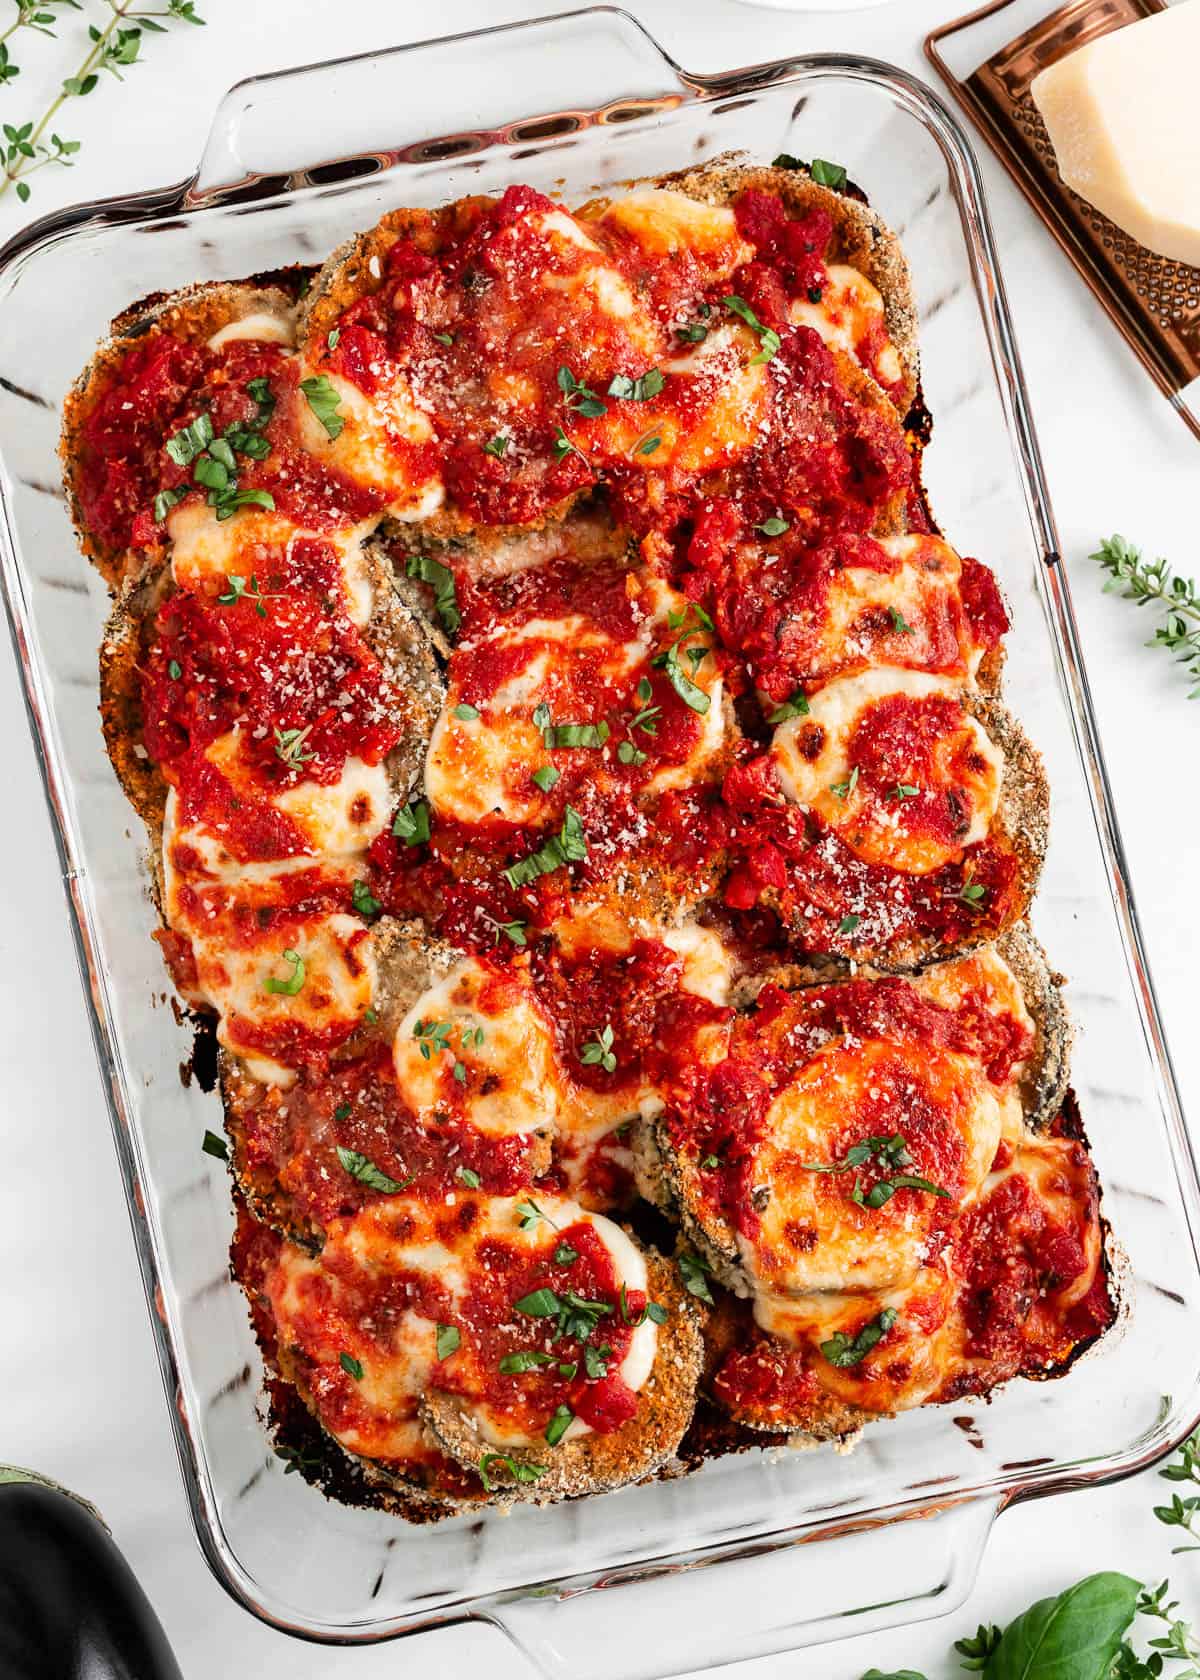 Eggplant parmesan baked in glass dish.